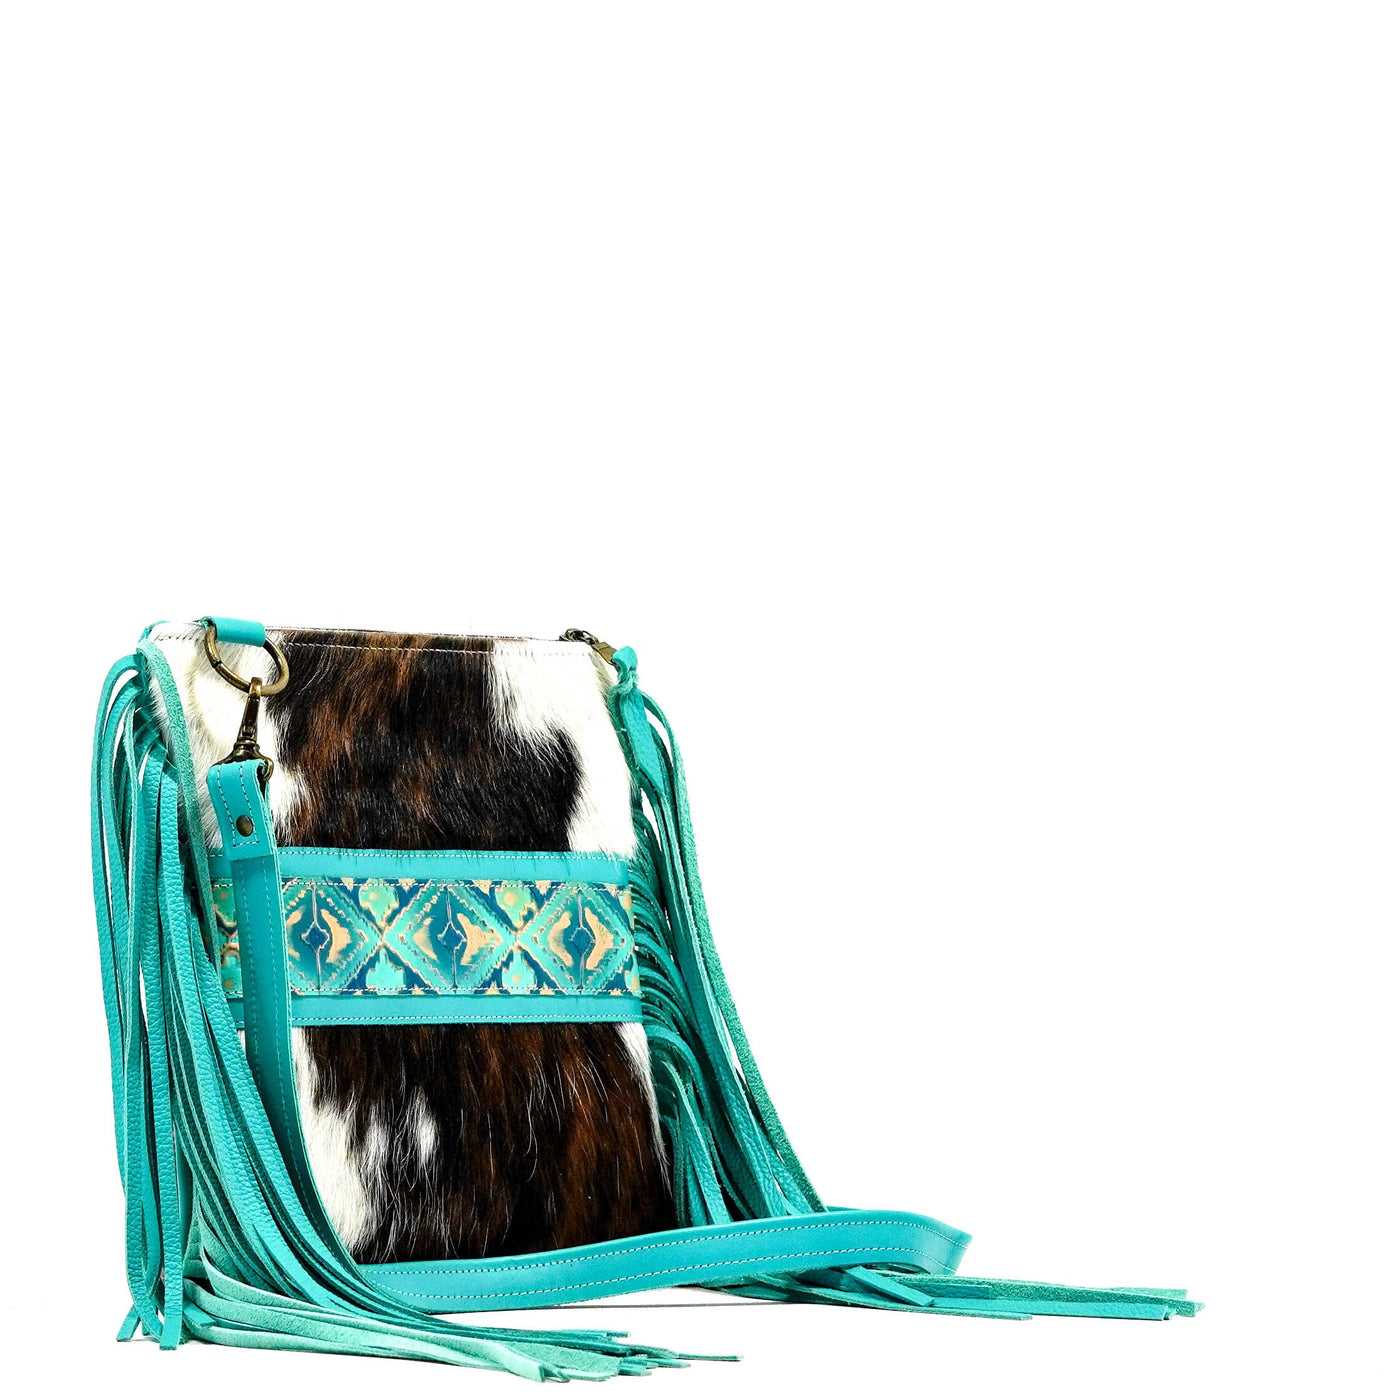 Shania - Tricolor w/ Margaritaville Navajo-Shania-Western-Cowhide-Bags-Handmade-Products-Gifts-Dancing Cactus Designs